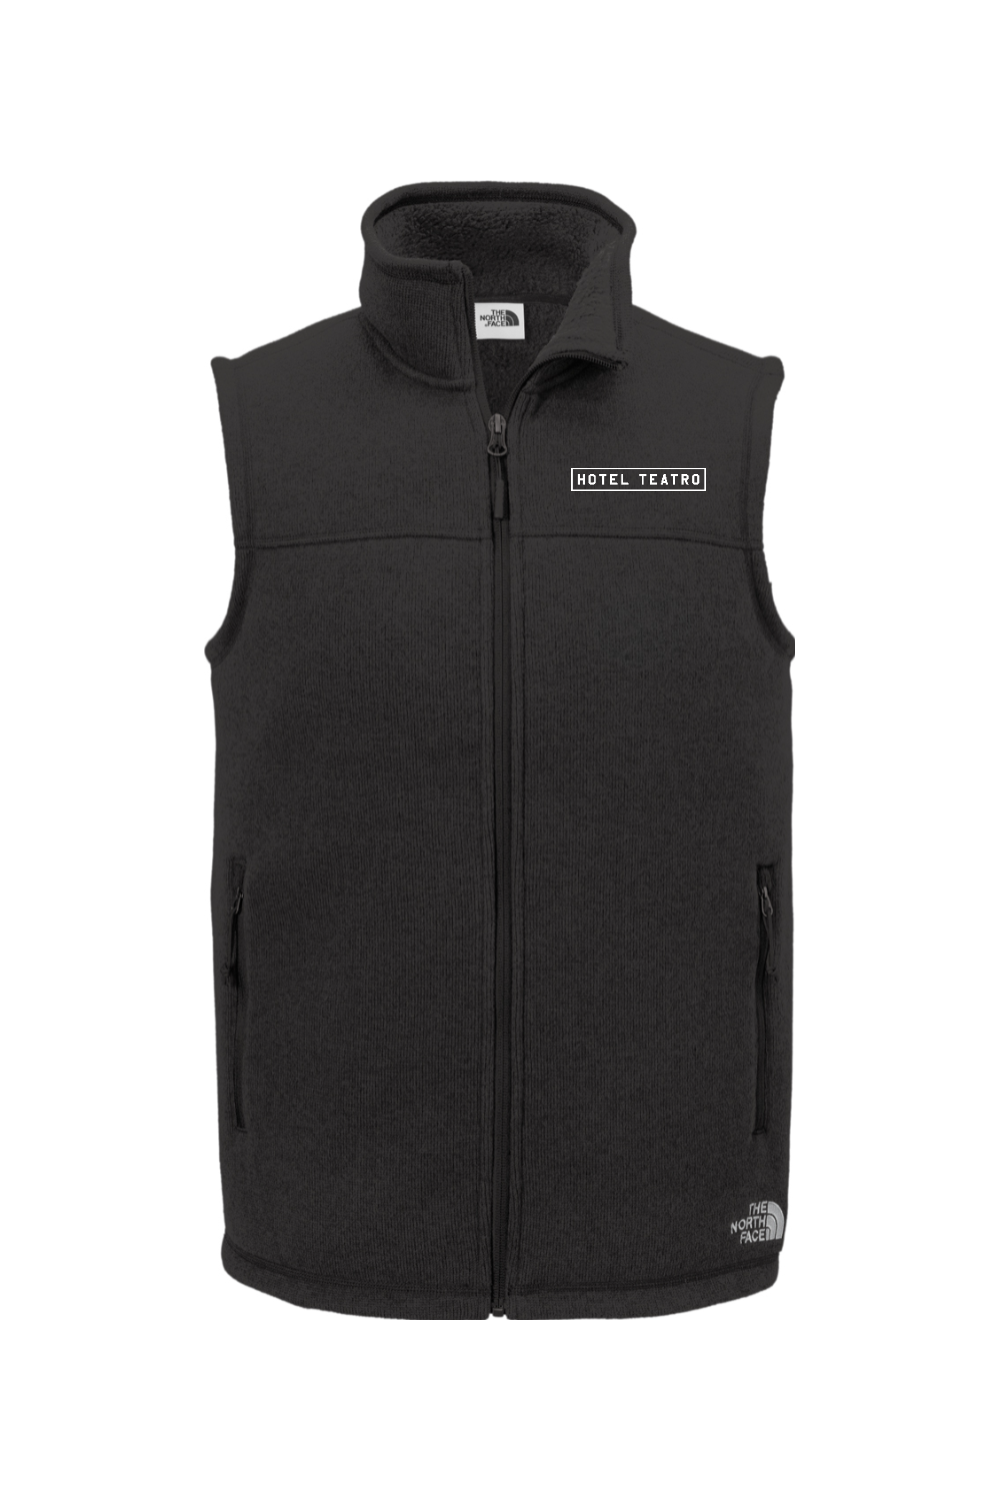 The Nickel - The North Face Sweater Fleece Vest